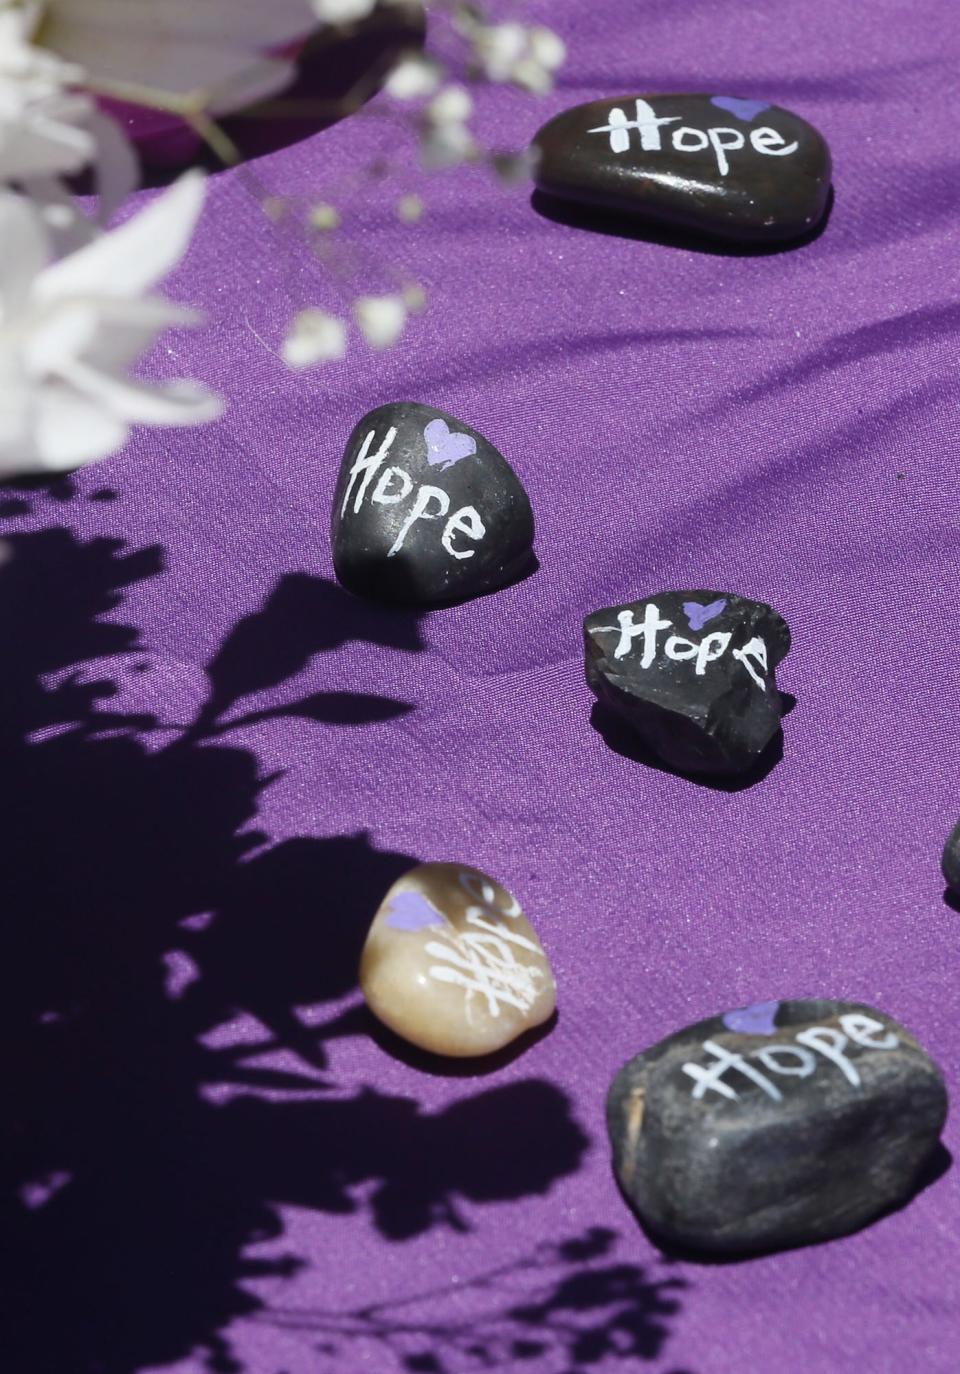 Hope stones decorate the registration table.